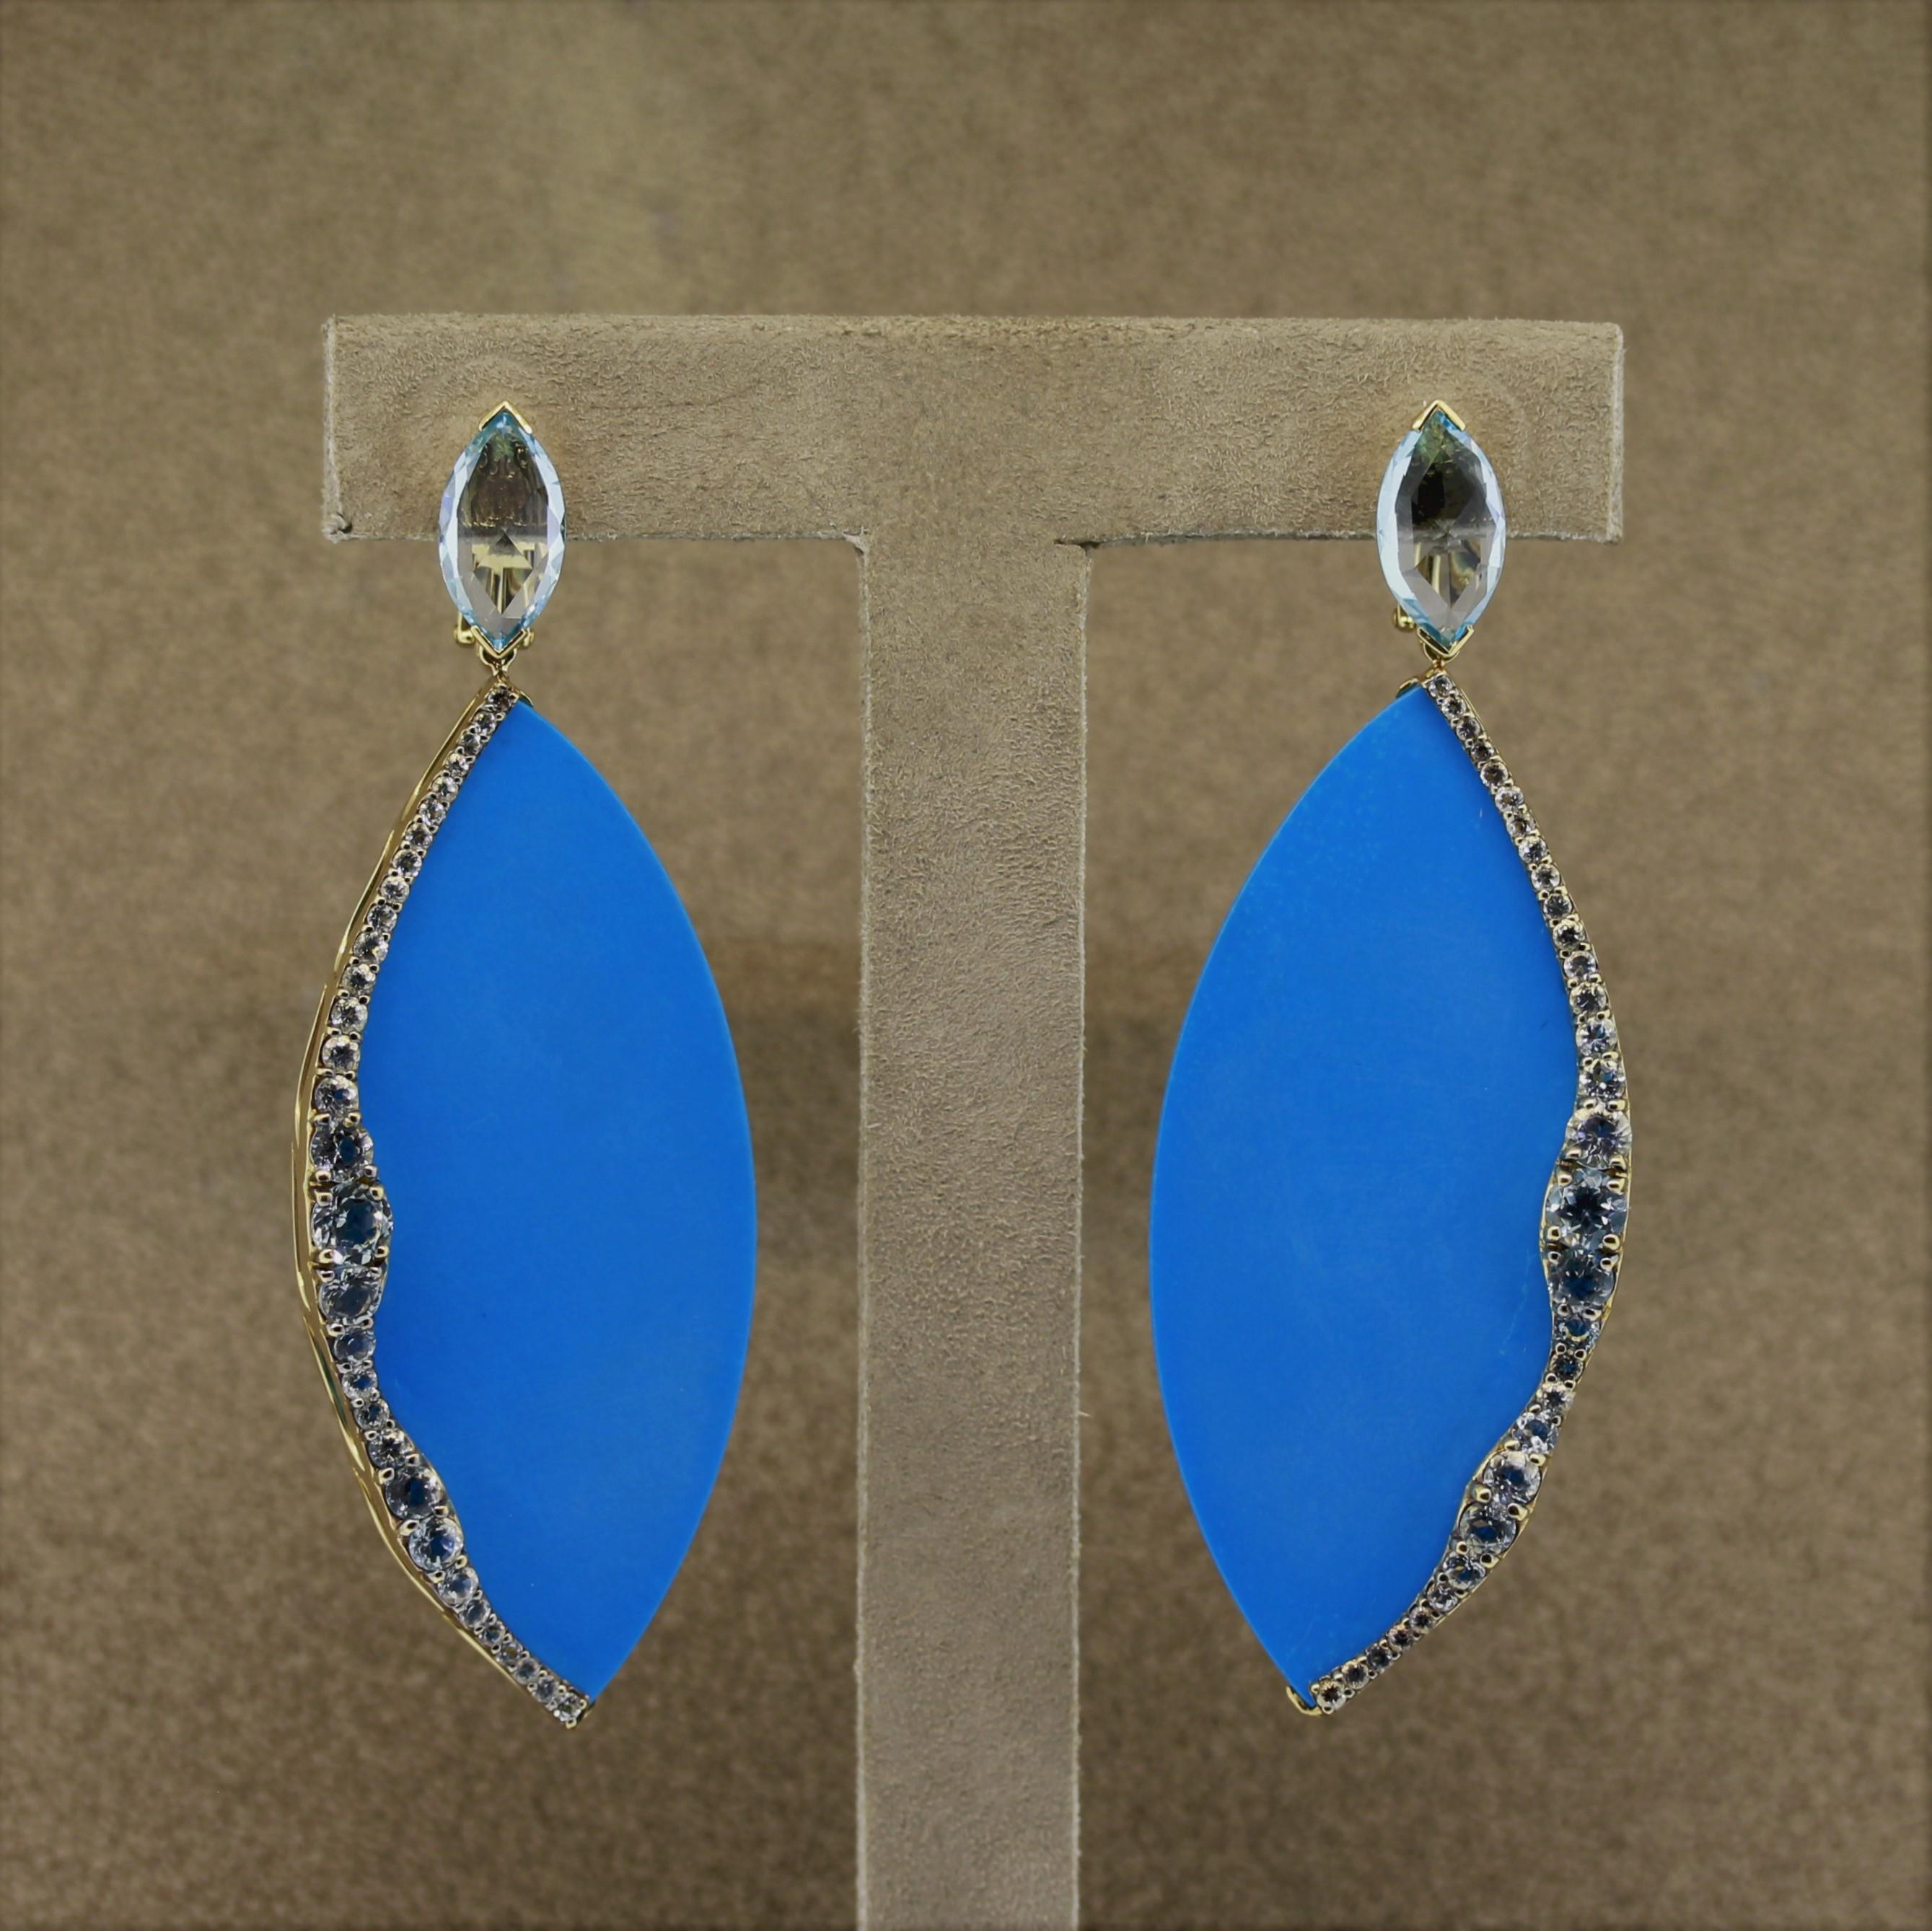 A fabulous pair of earrings made to evoke emotions of the sea and ocean. They feature two fine blue gemstones, a pair of marquise shaped turquoise and lovely ocean blue aquamarines. The aquamarine are set in the sides of the turquoise reminiscent of